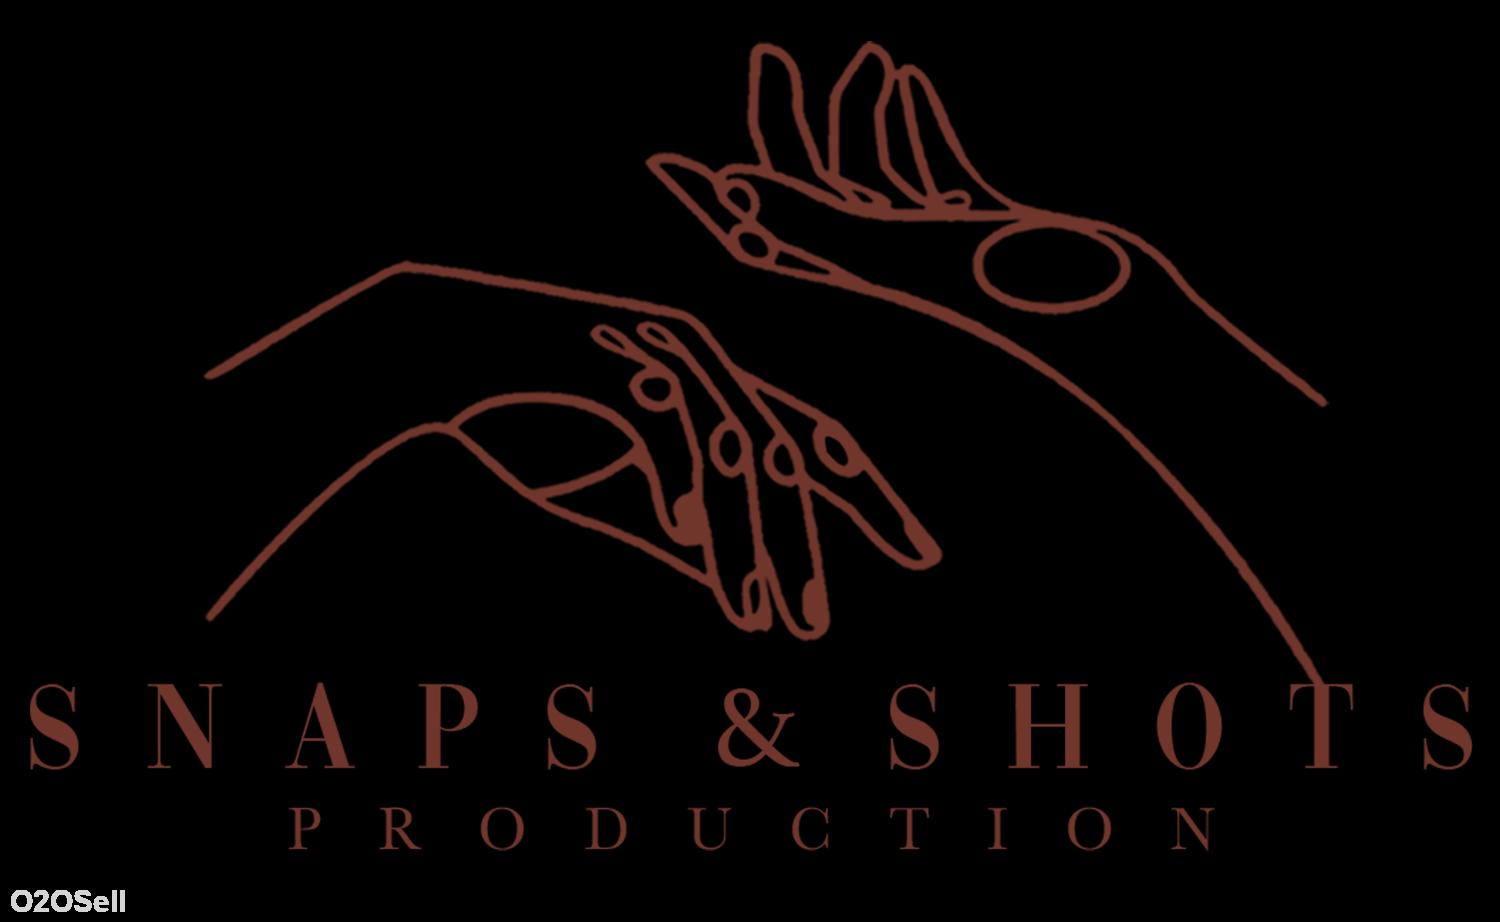 Snaps and short production - Cover Image